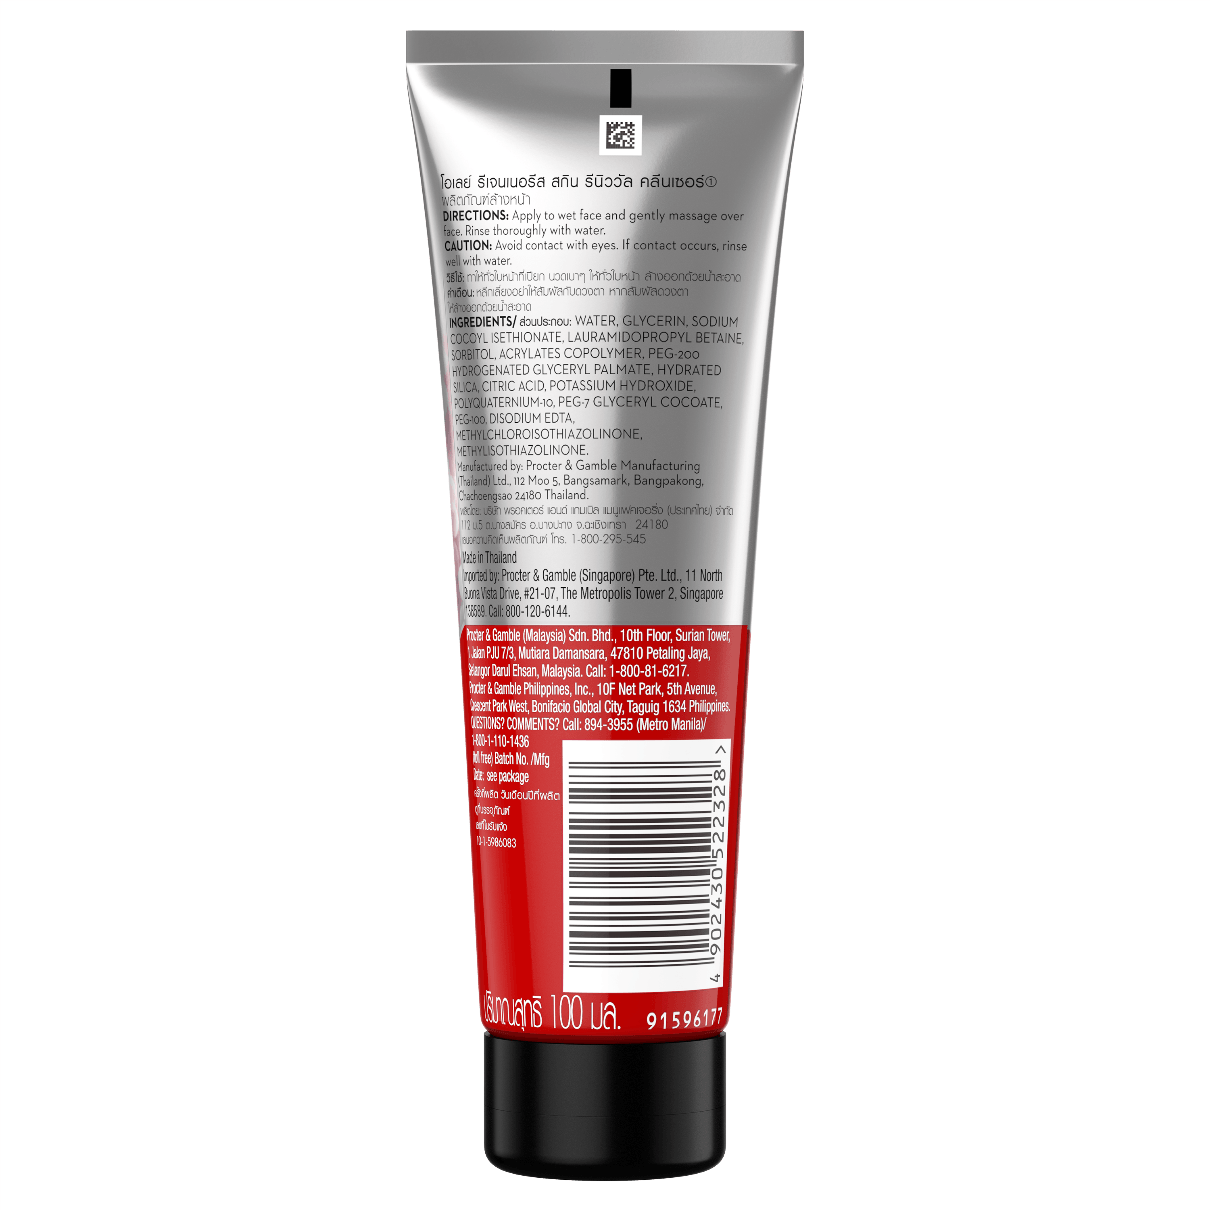 PDP PH - Olay Regenerist Advanced Cleansing System SI1